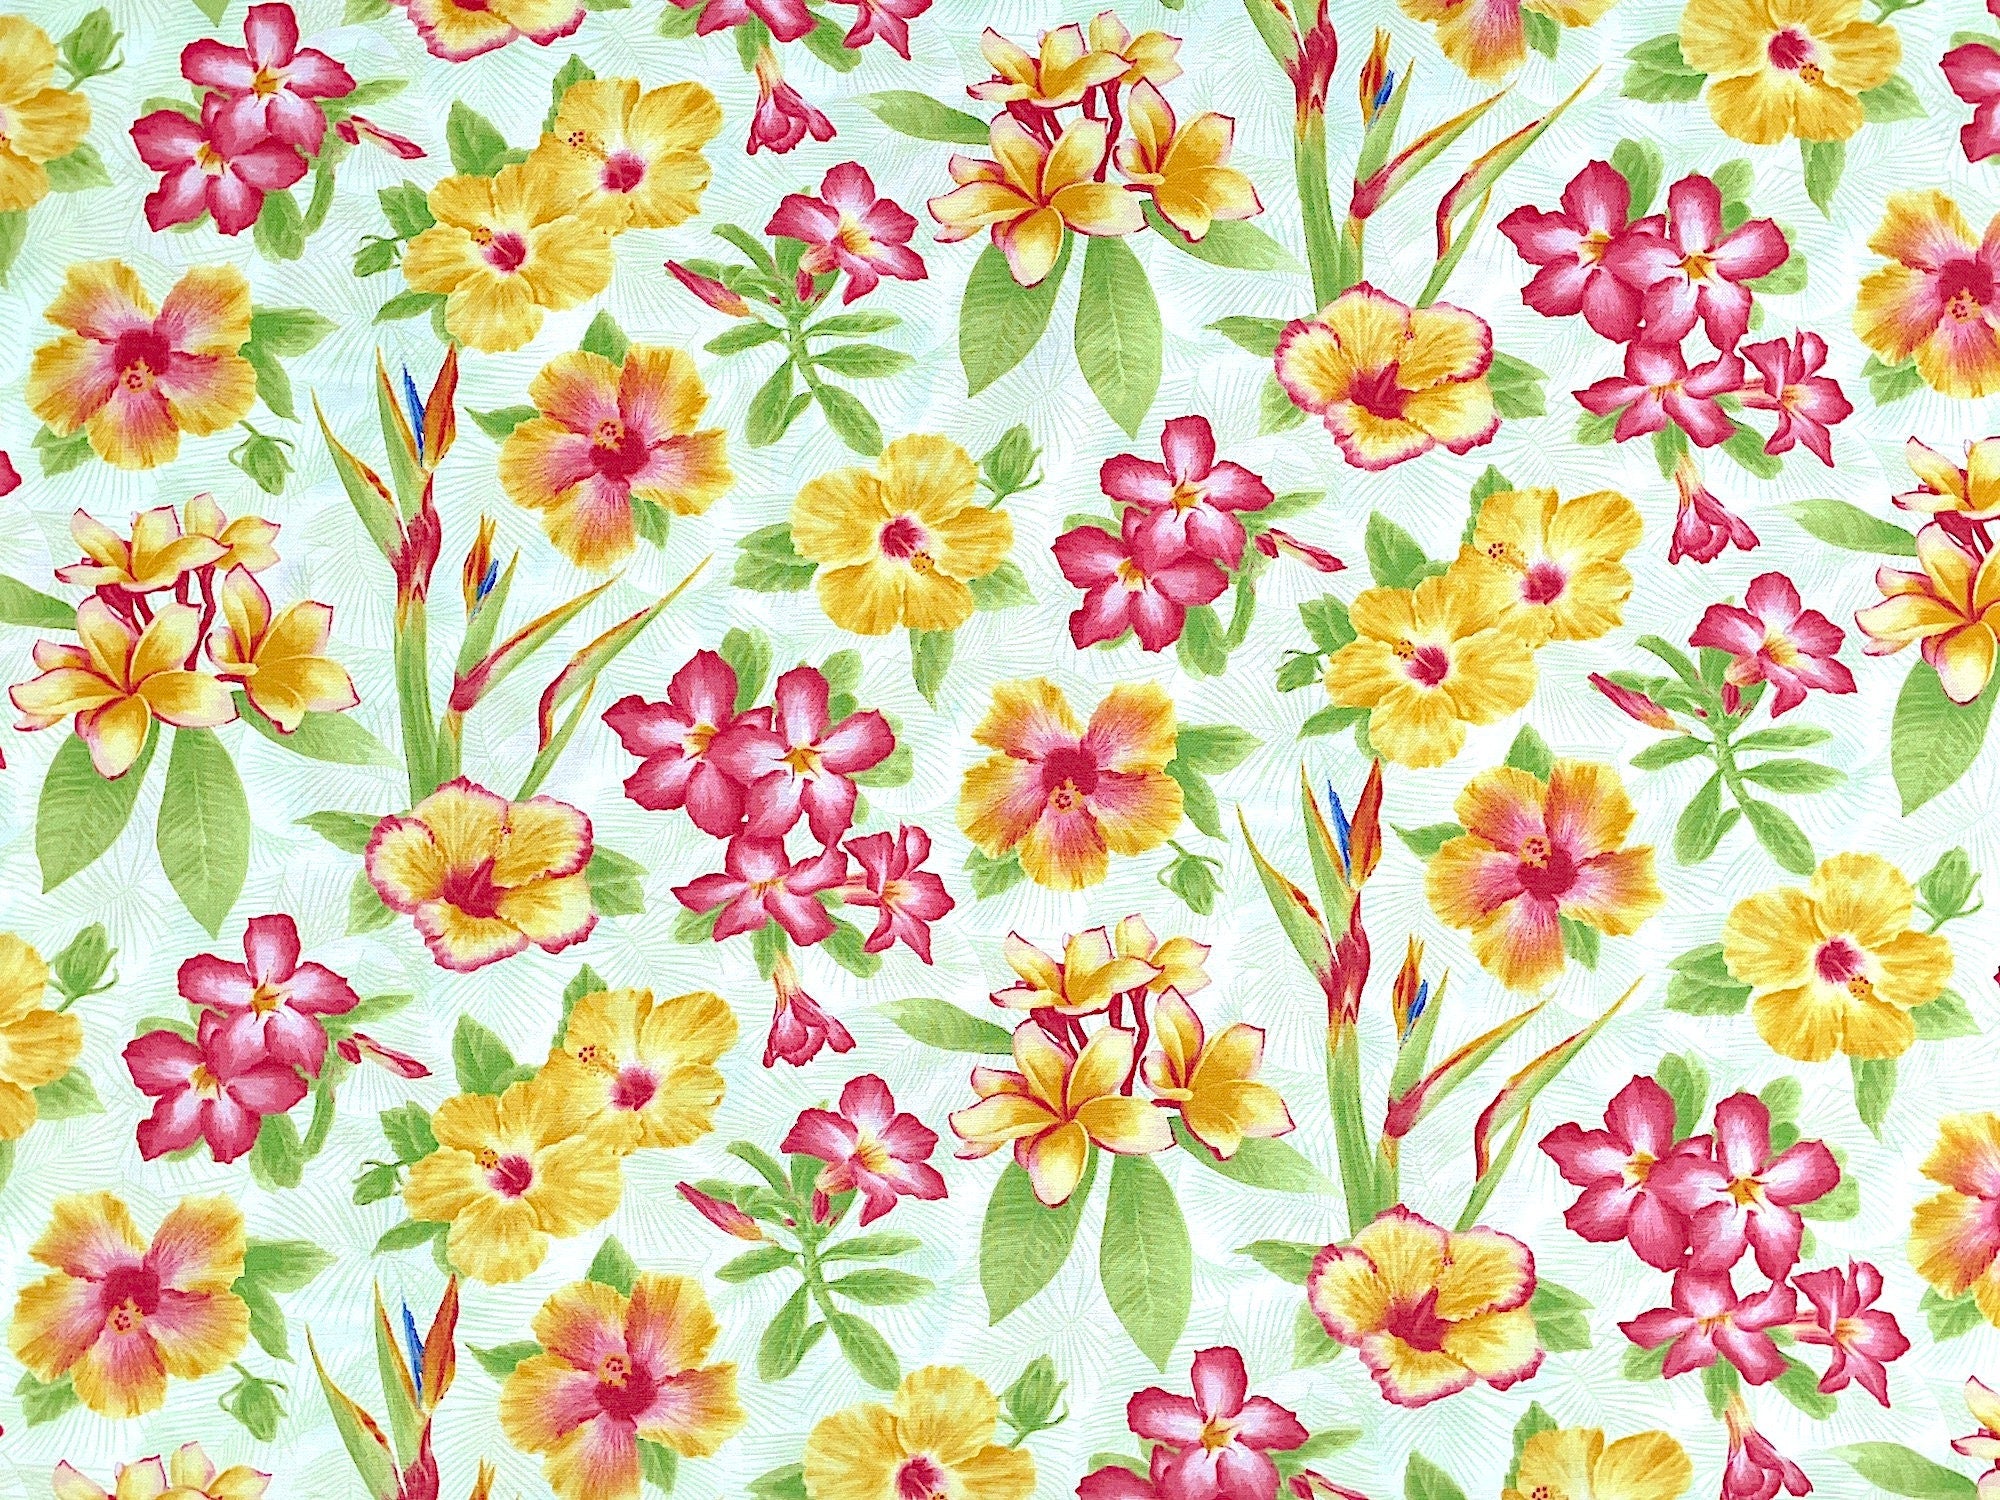 Here is a soft Pink and Yellow Flower Design. The all-over design is called Pink Paradise and is the creation of Jane Shasky. It consists of Pink and Yellow Hibiscus with green leaves on a white background.